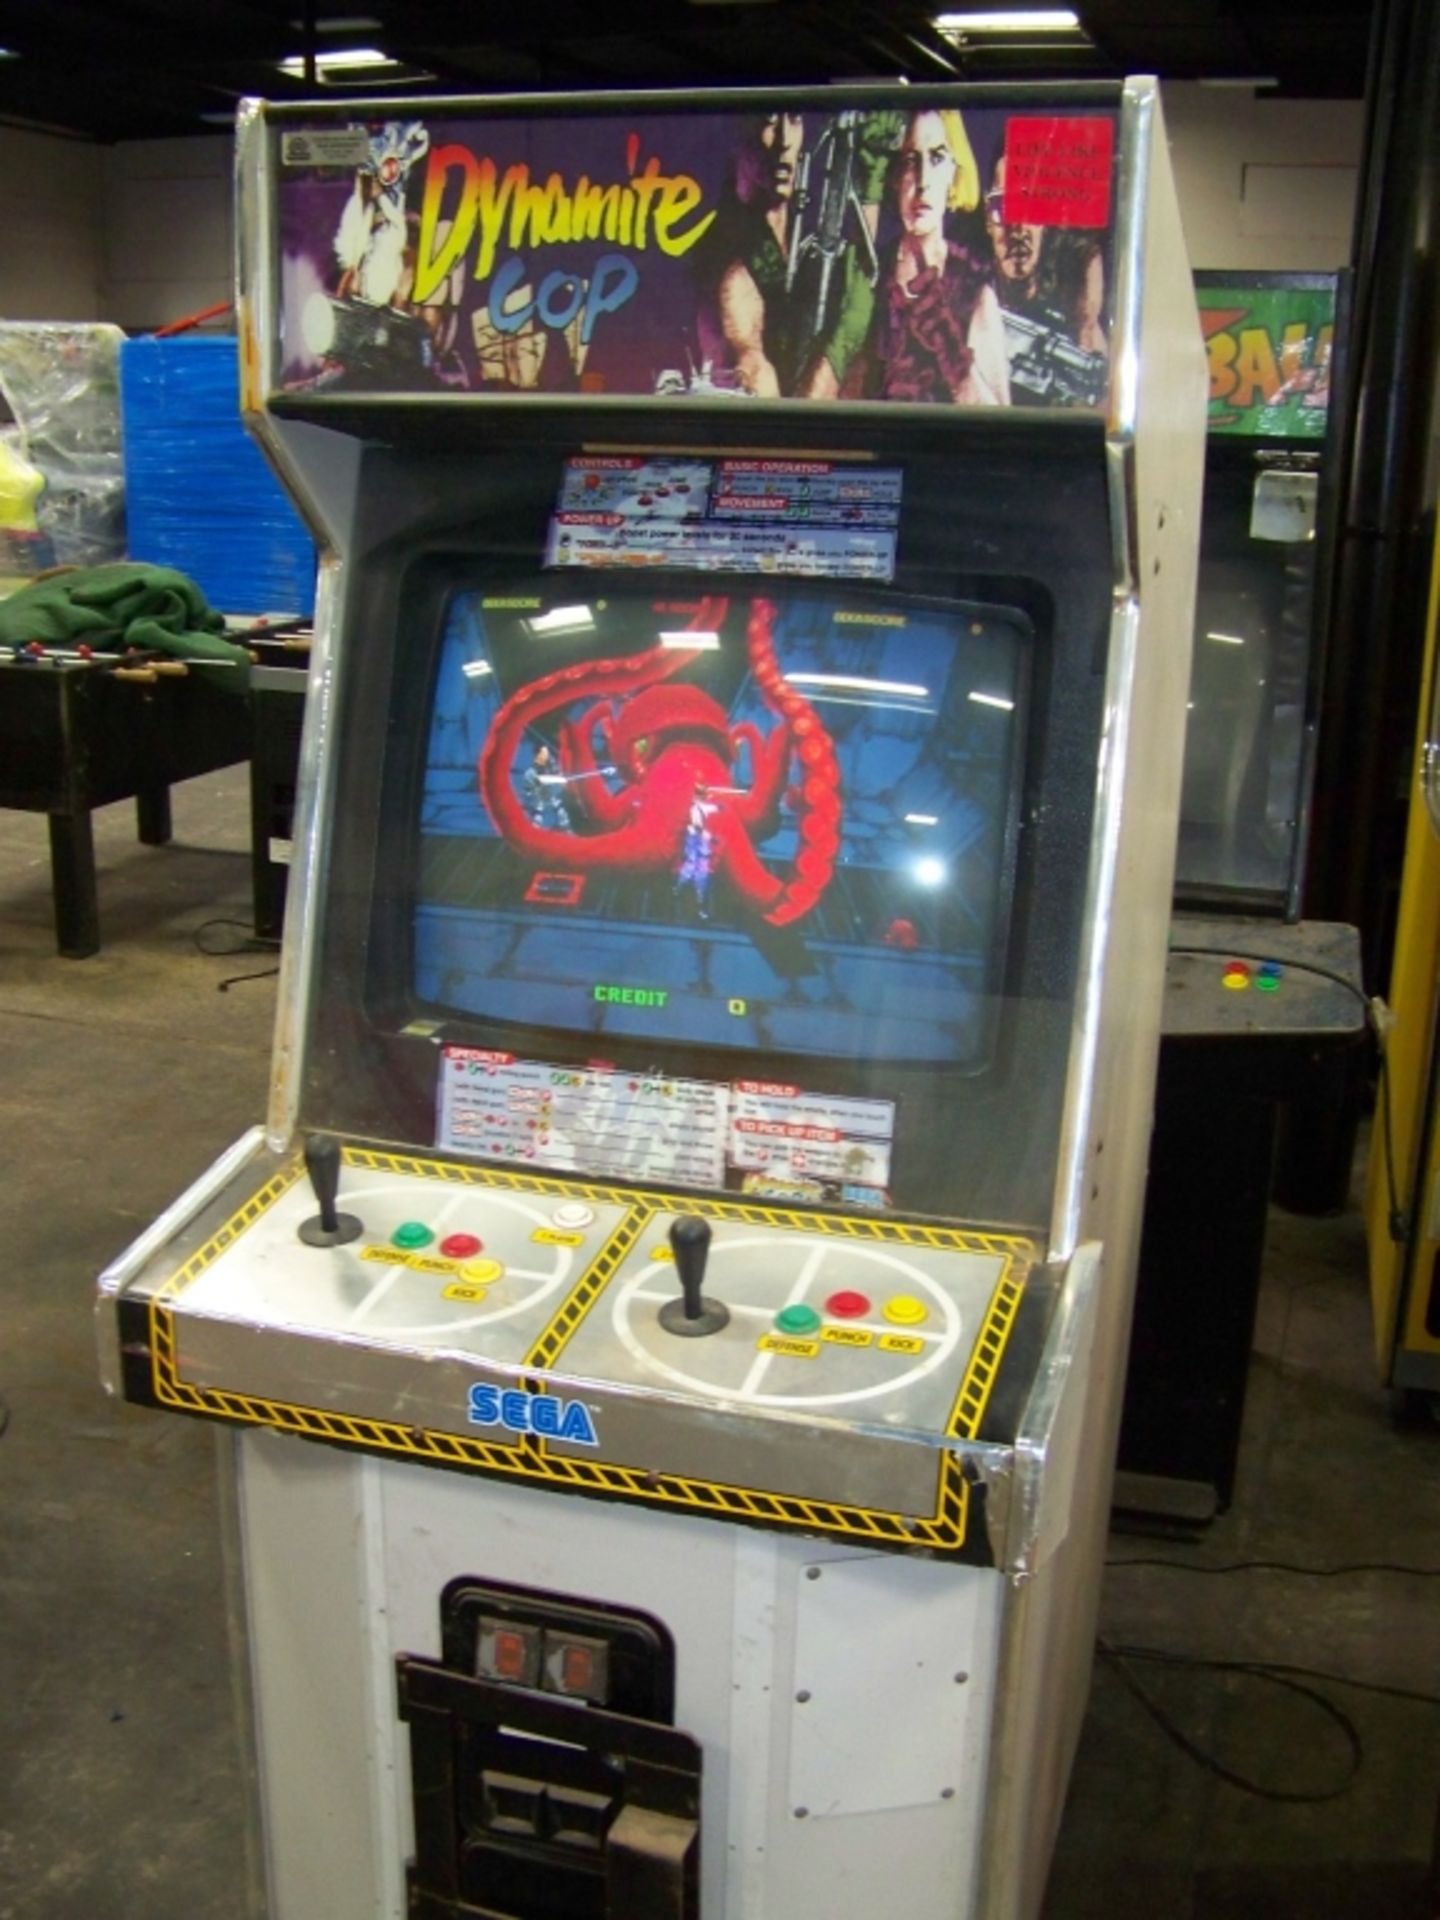 DYNAMITE COP ACTION FIGHTING ARCADE GAME - Image 3 of 4